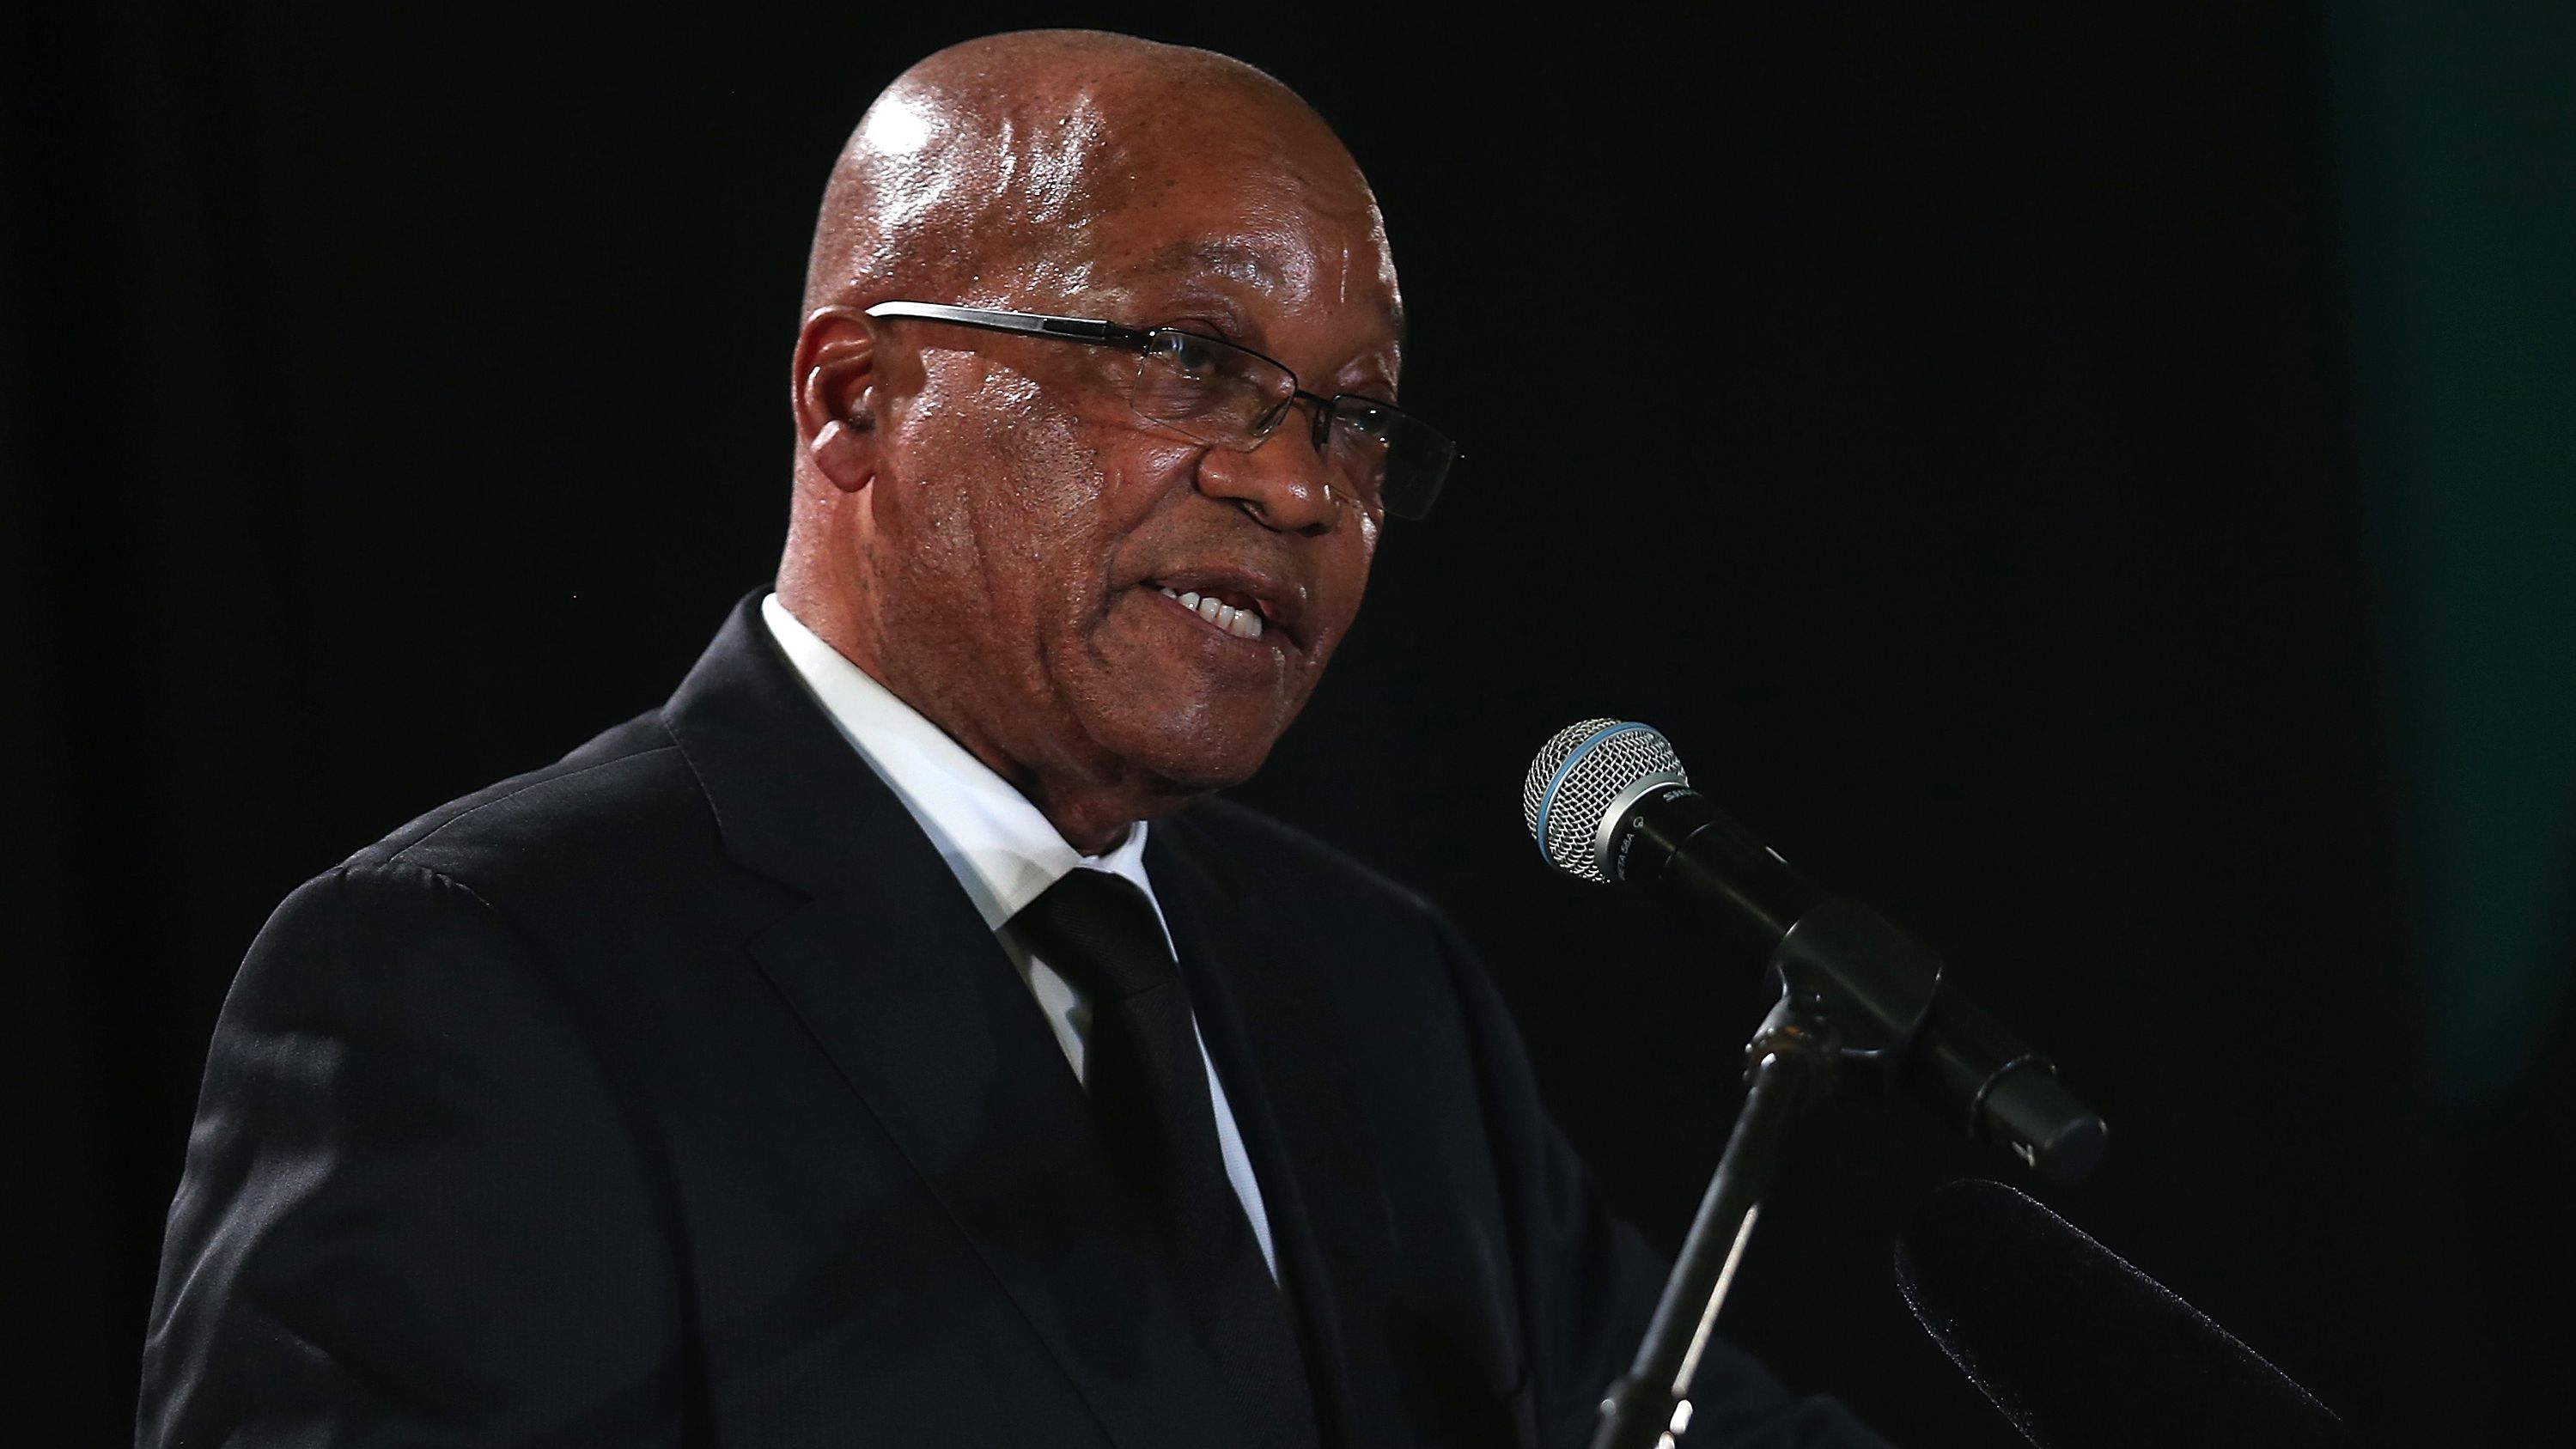 South African President Jacob Zuma offered to repay some of the funds that had been used to renovate his private residence. 